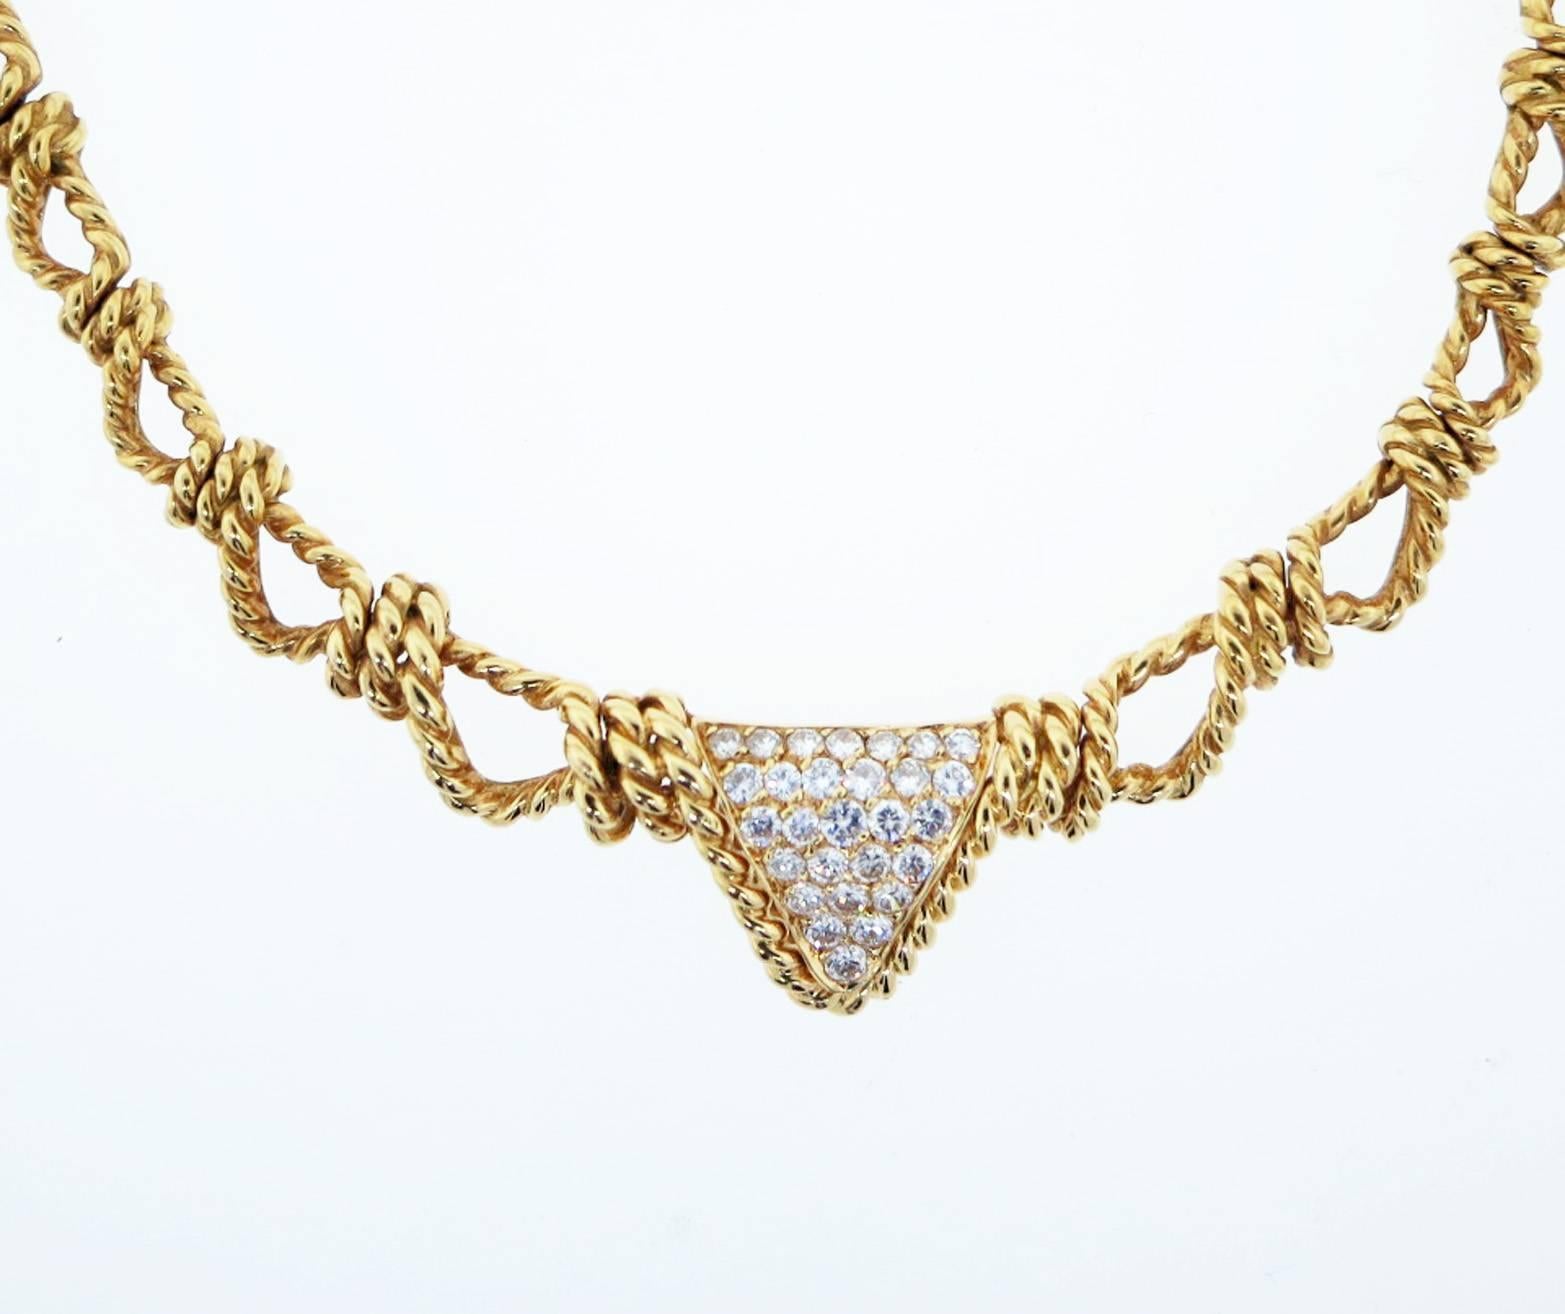 Daytime into evening wearable 18kt. yellow gold necklace. The triangular center plaque is set with 28 round brilliant cut diamonds of the finest quality totaling approx .1.0cts. The necklace measures approx 16 inches. Hidden catch with French